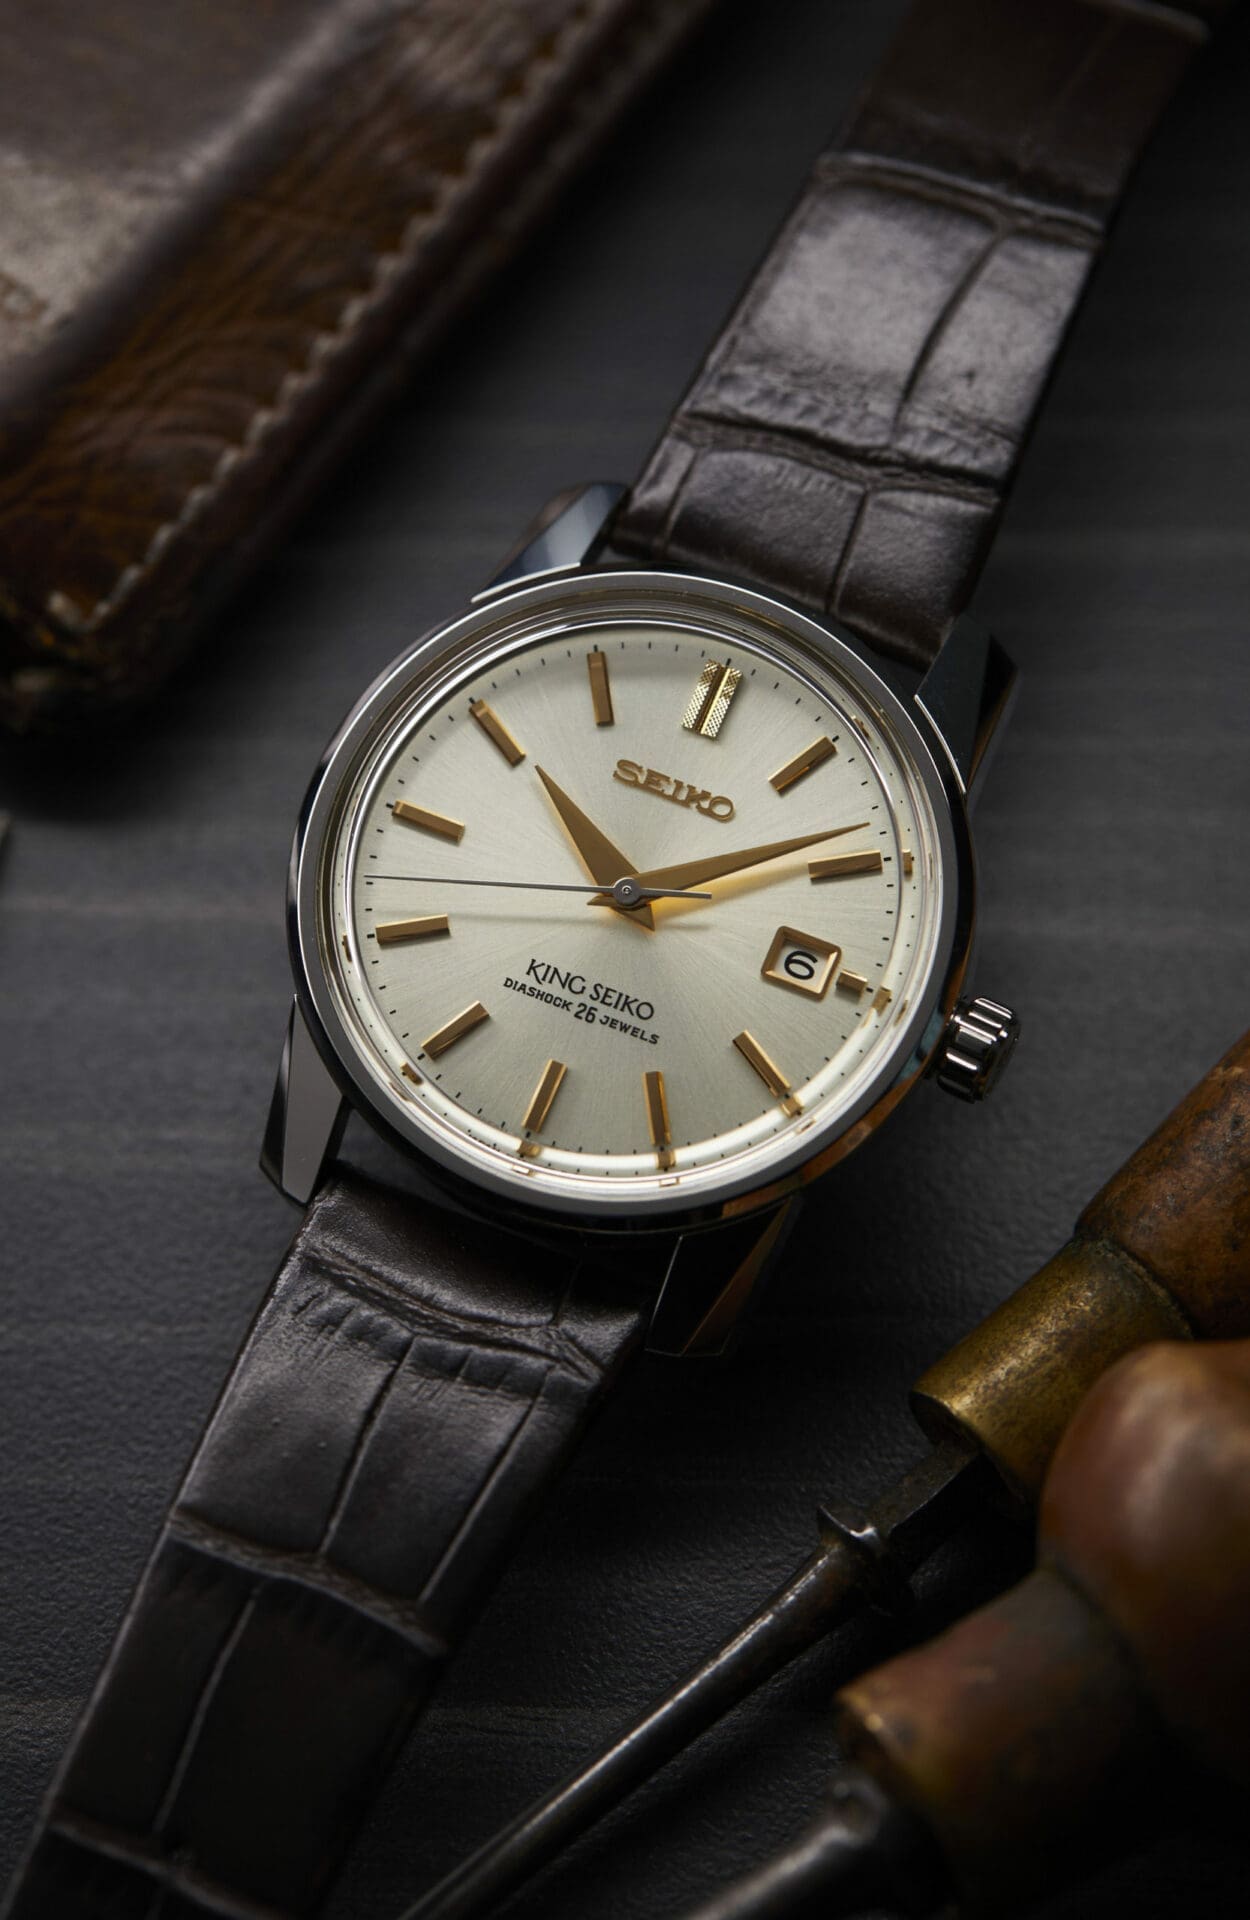 VIDEO: The King Seiko SJE087 gets sexed up with gilt features and a champagne dial